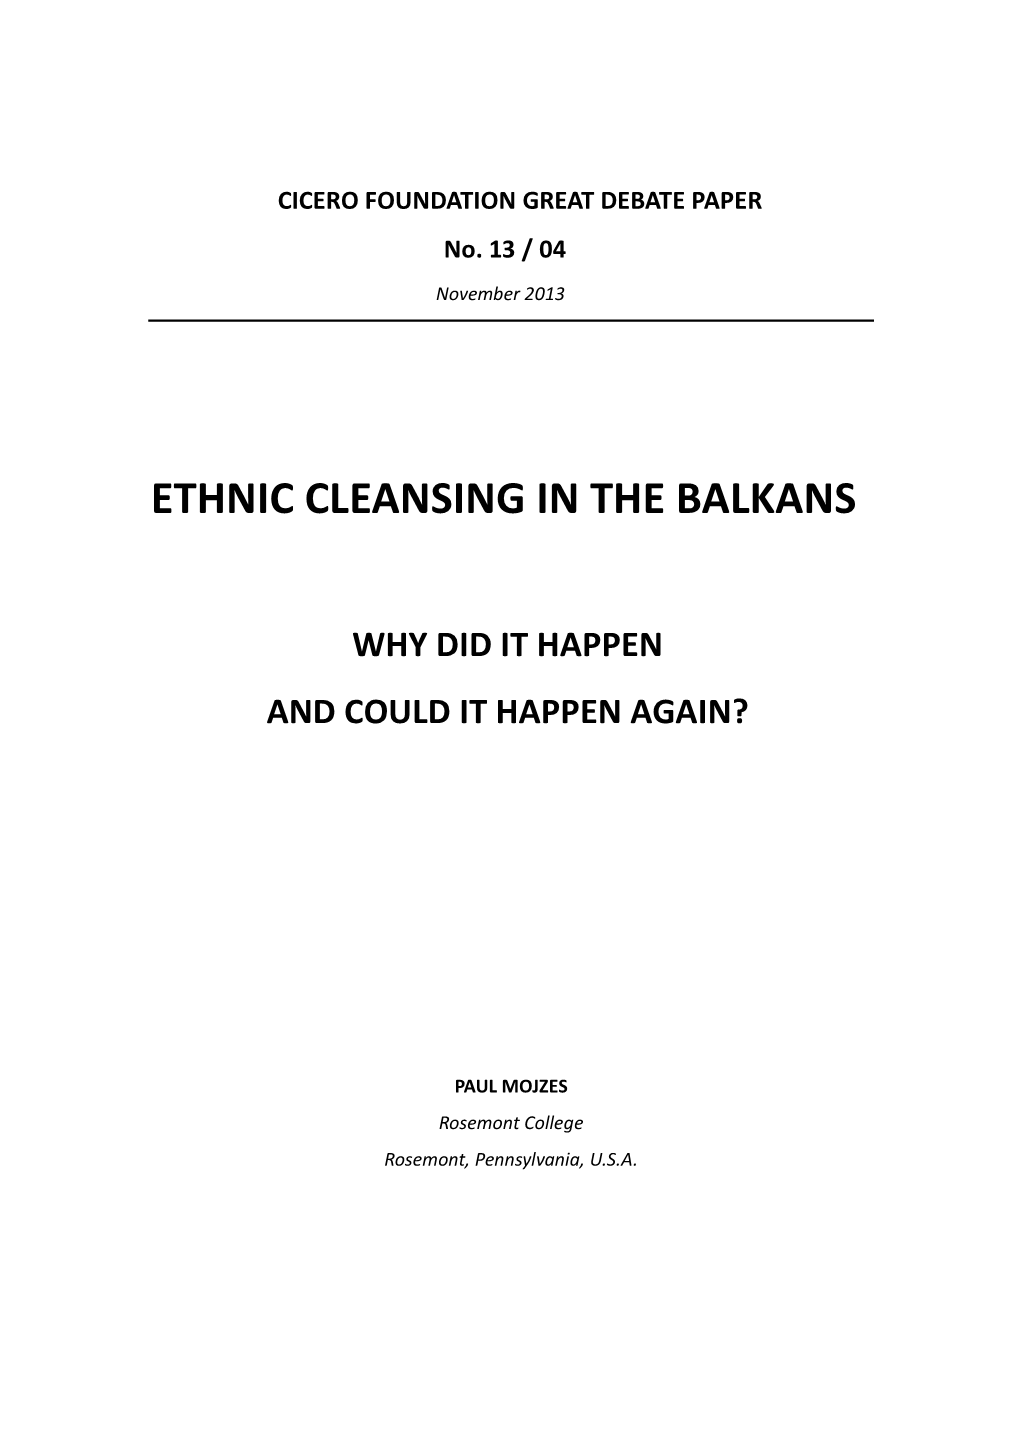 Ethnic Cleansing in the Balkans